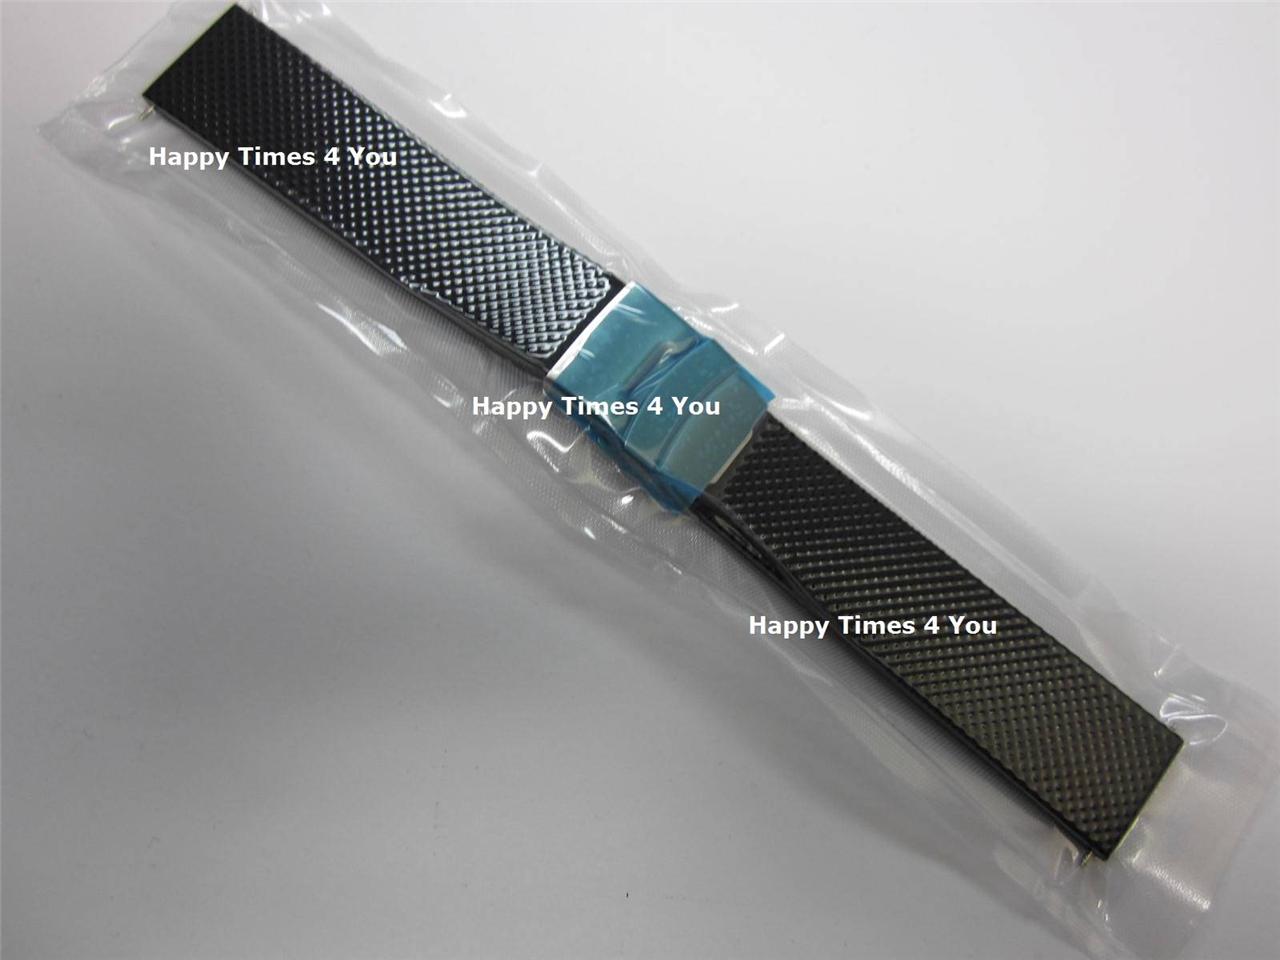 Details about Movado Bold Rubber Watch Band Strap Bracelet Replacement